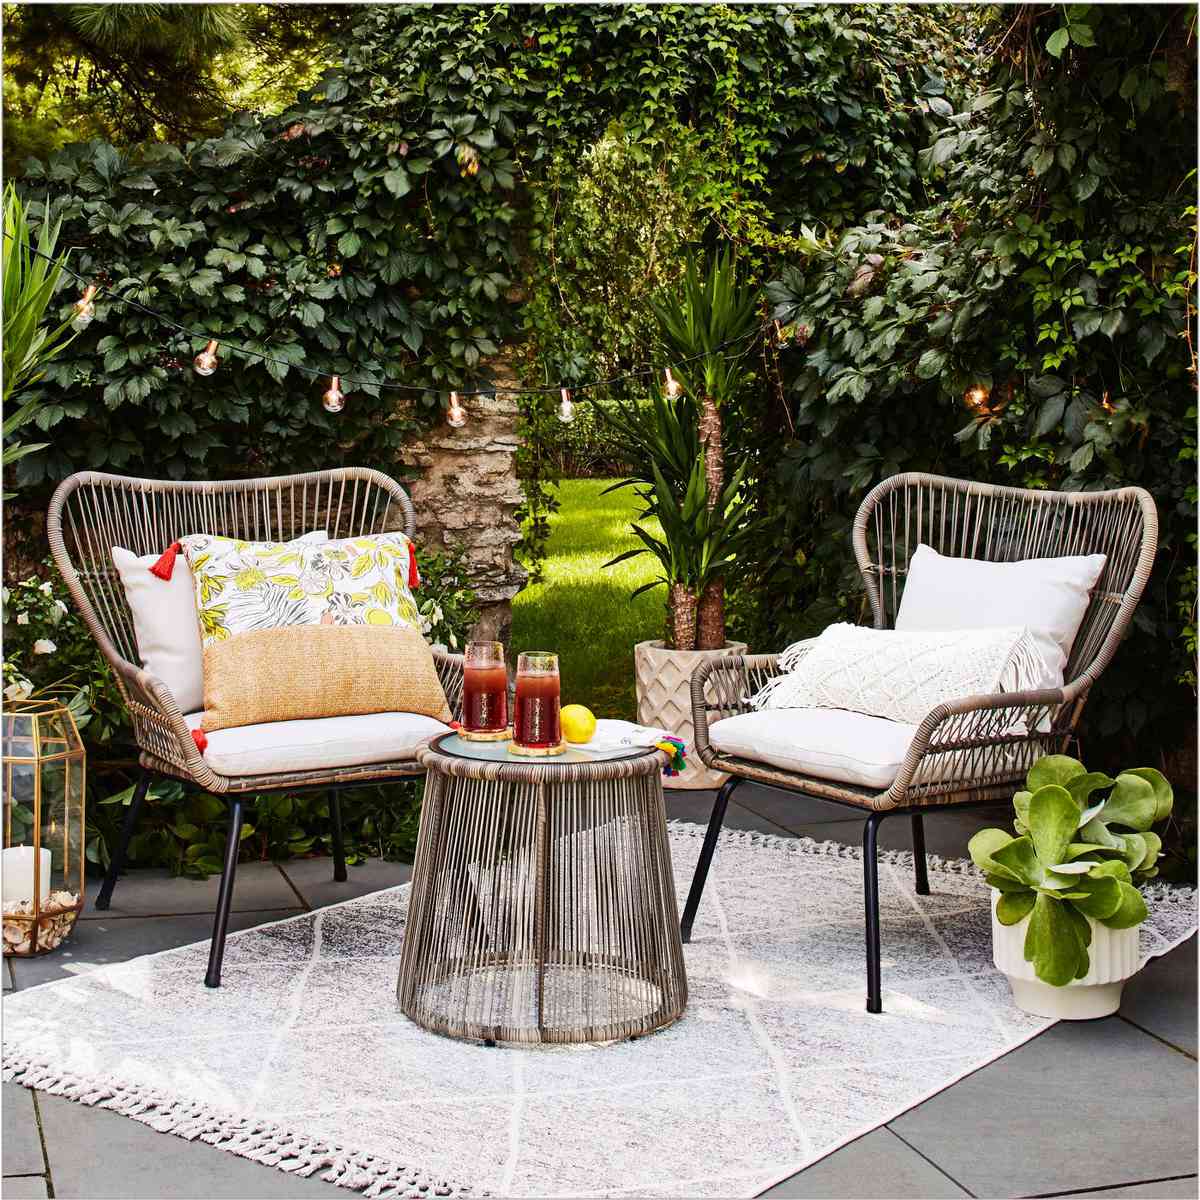 Best Outdoor Furniture For Small Spaces, Piece Resin Wicker Patio Dining Sets